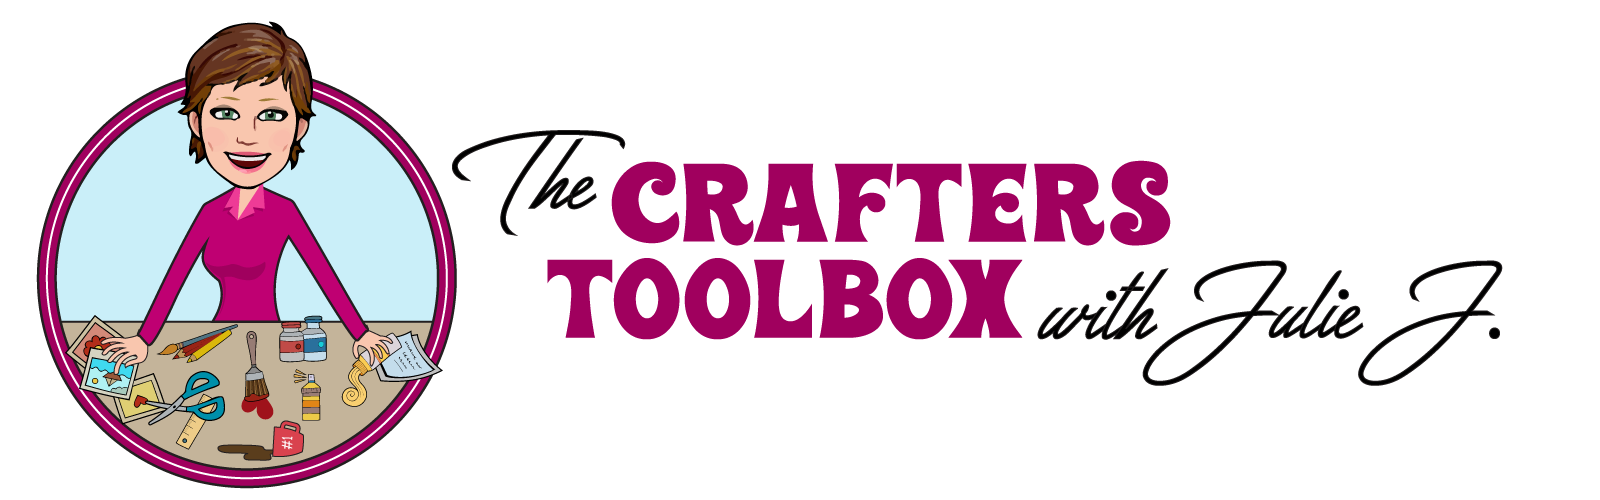 The Crafter's Toolbox Logo